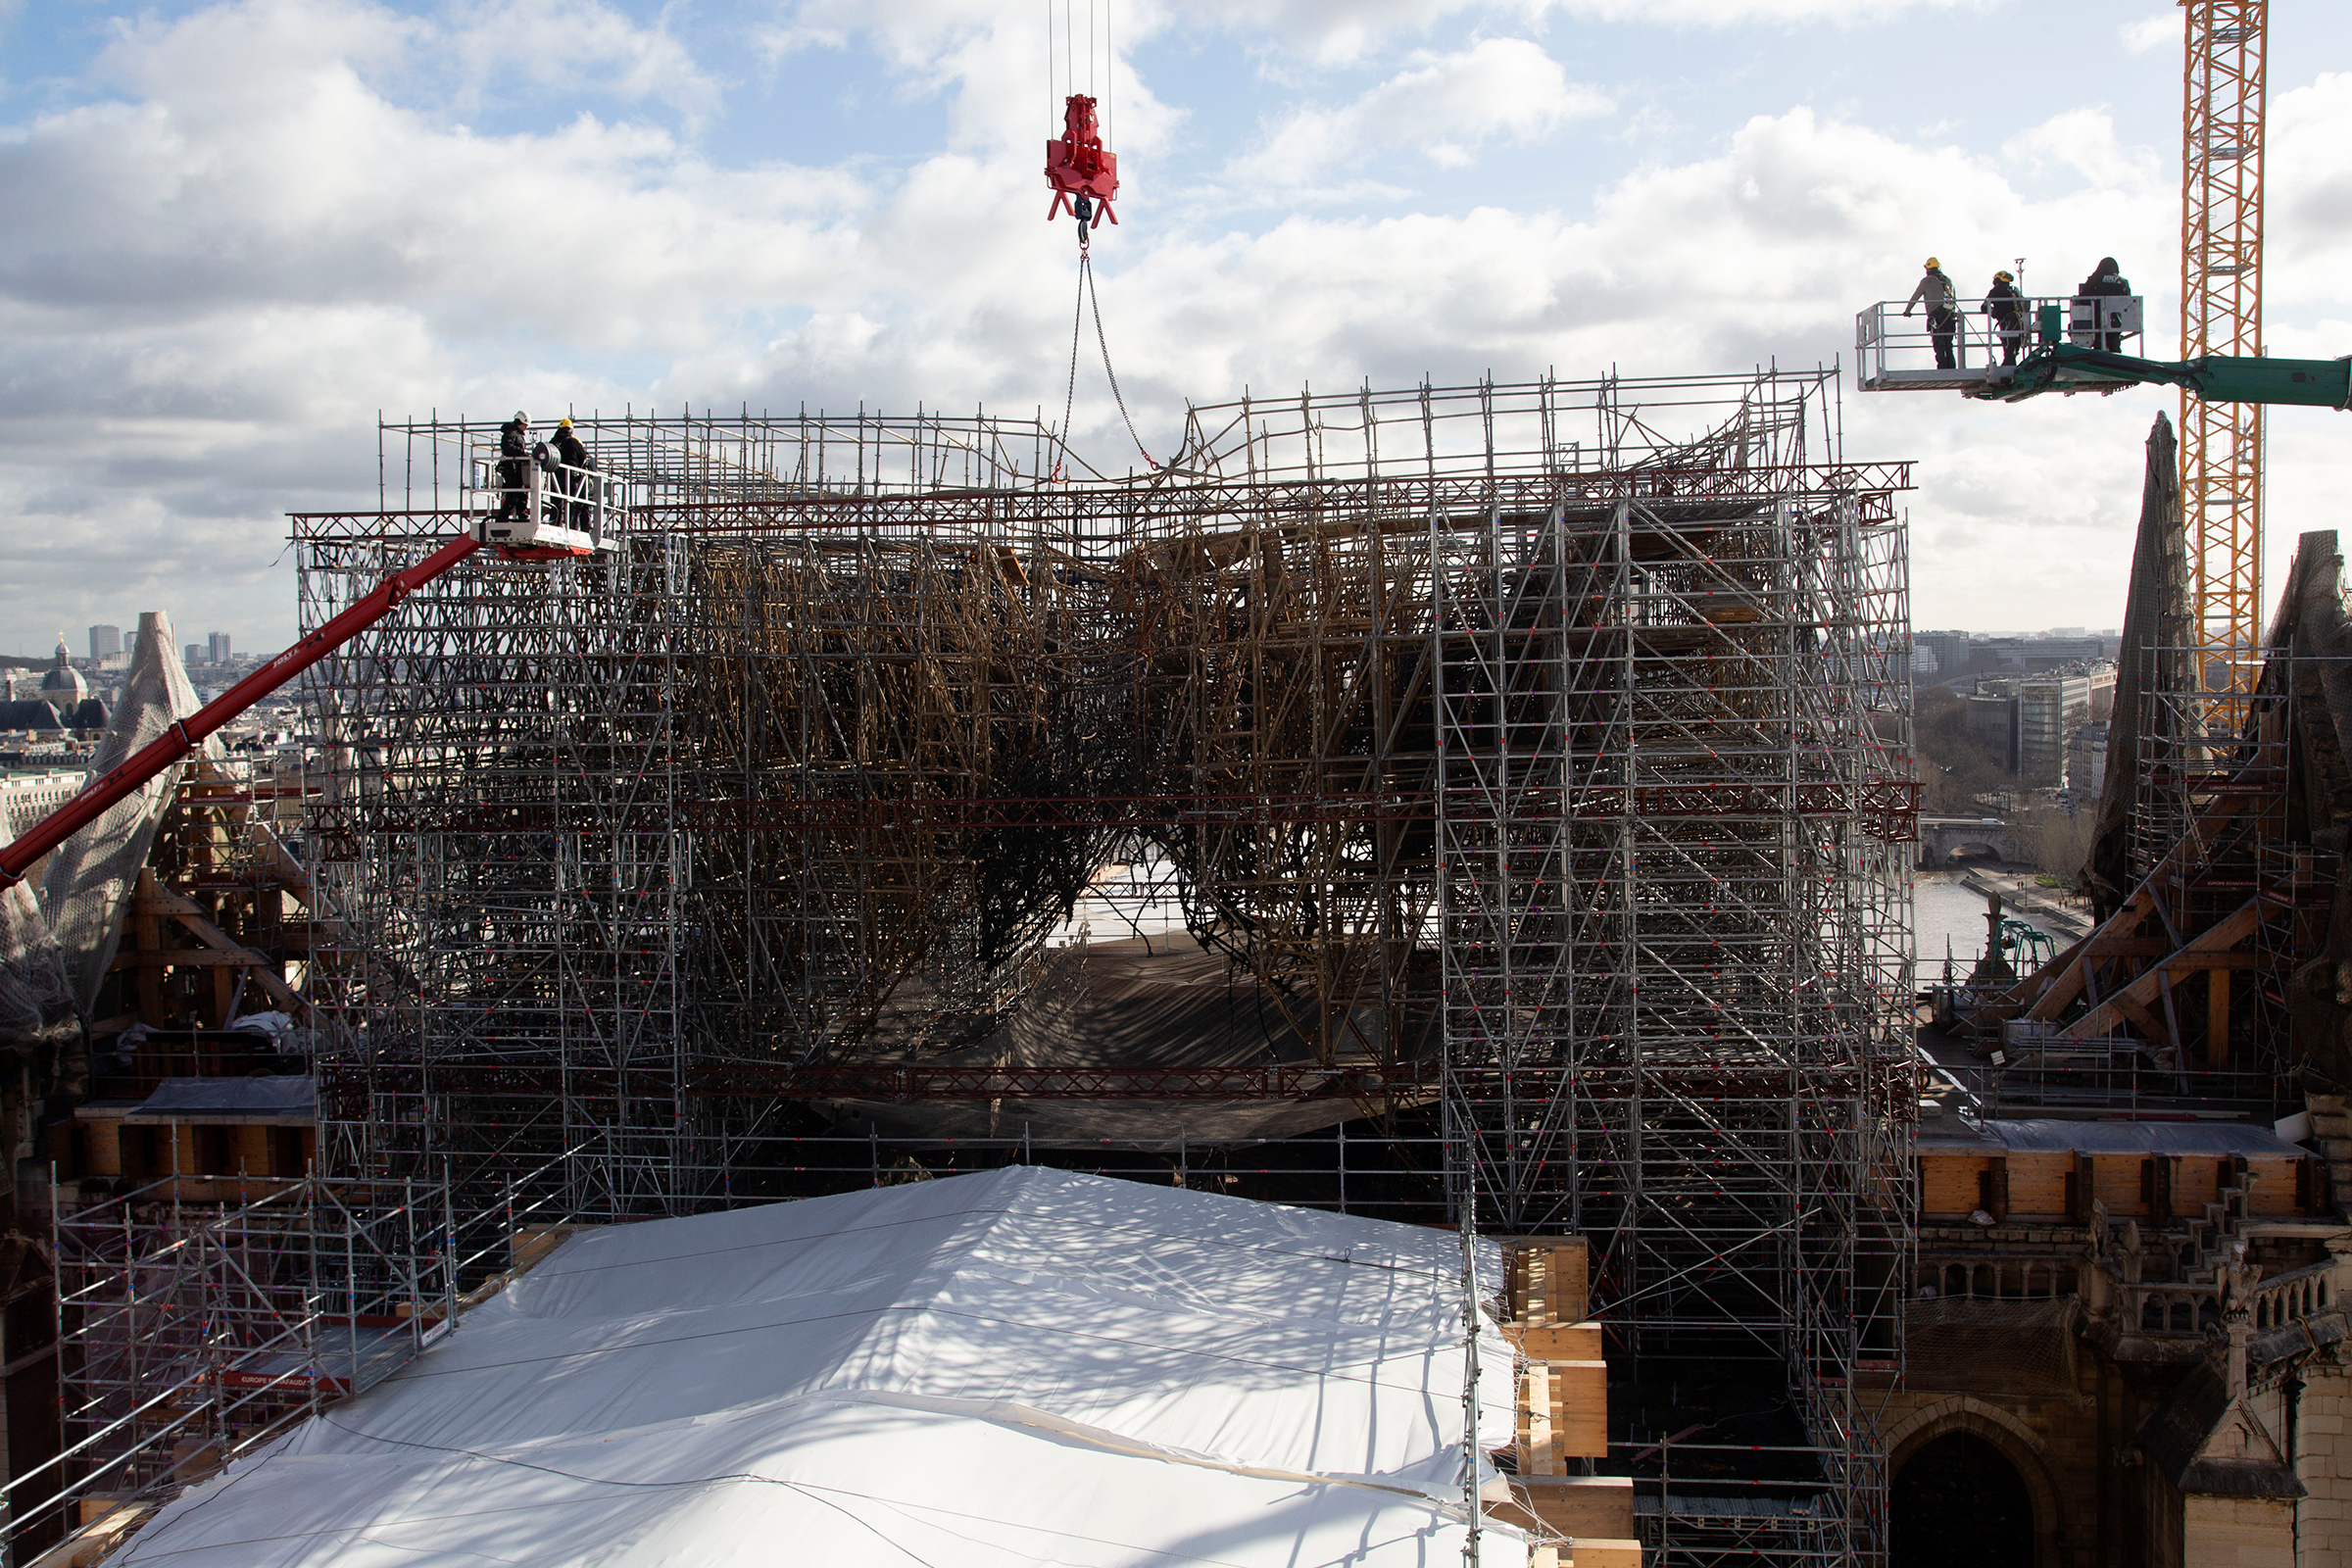 In February, steel pieces are lifted to reinforce the scaffolding before it is disassembled.